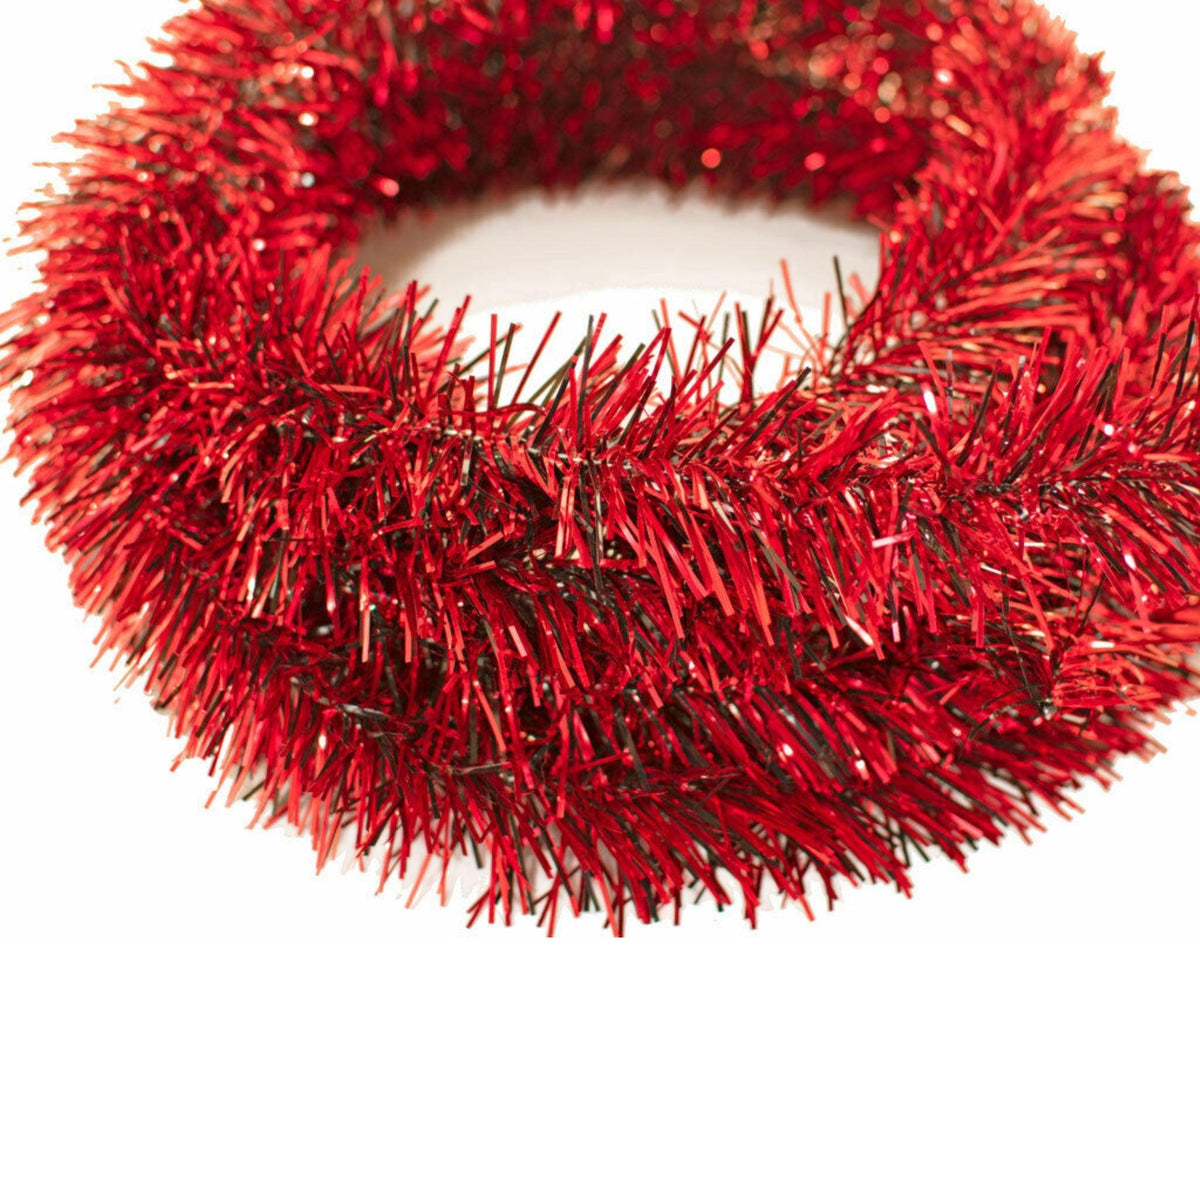 Lee Display's brand new 25ft Shiny Red and Black Tinsel Garlands and Fringe Embellishments on sale at leedisplay.com